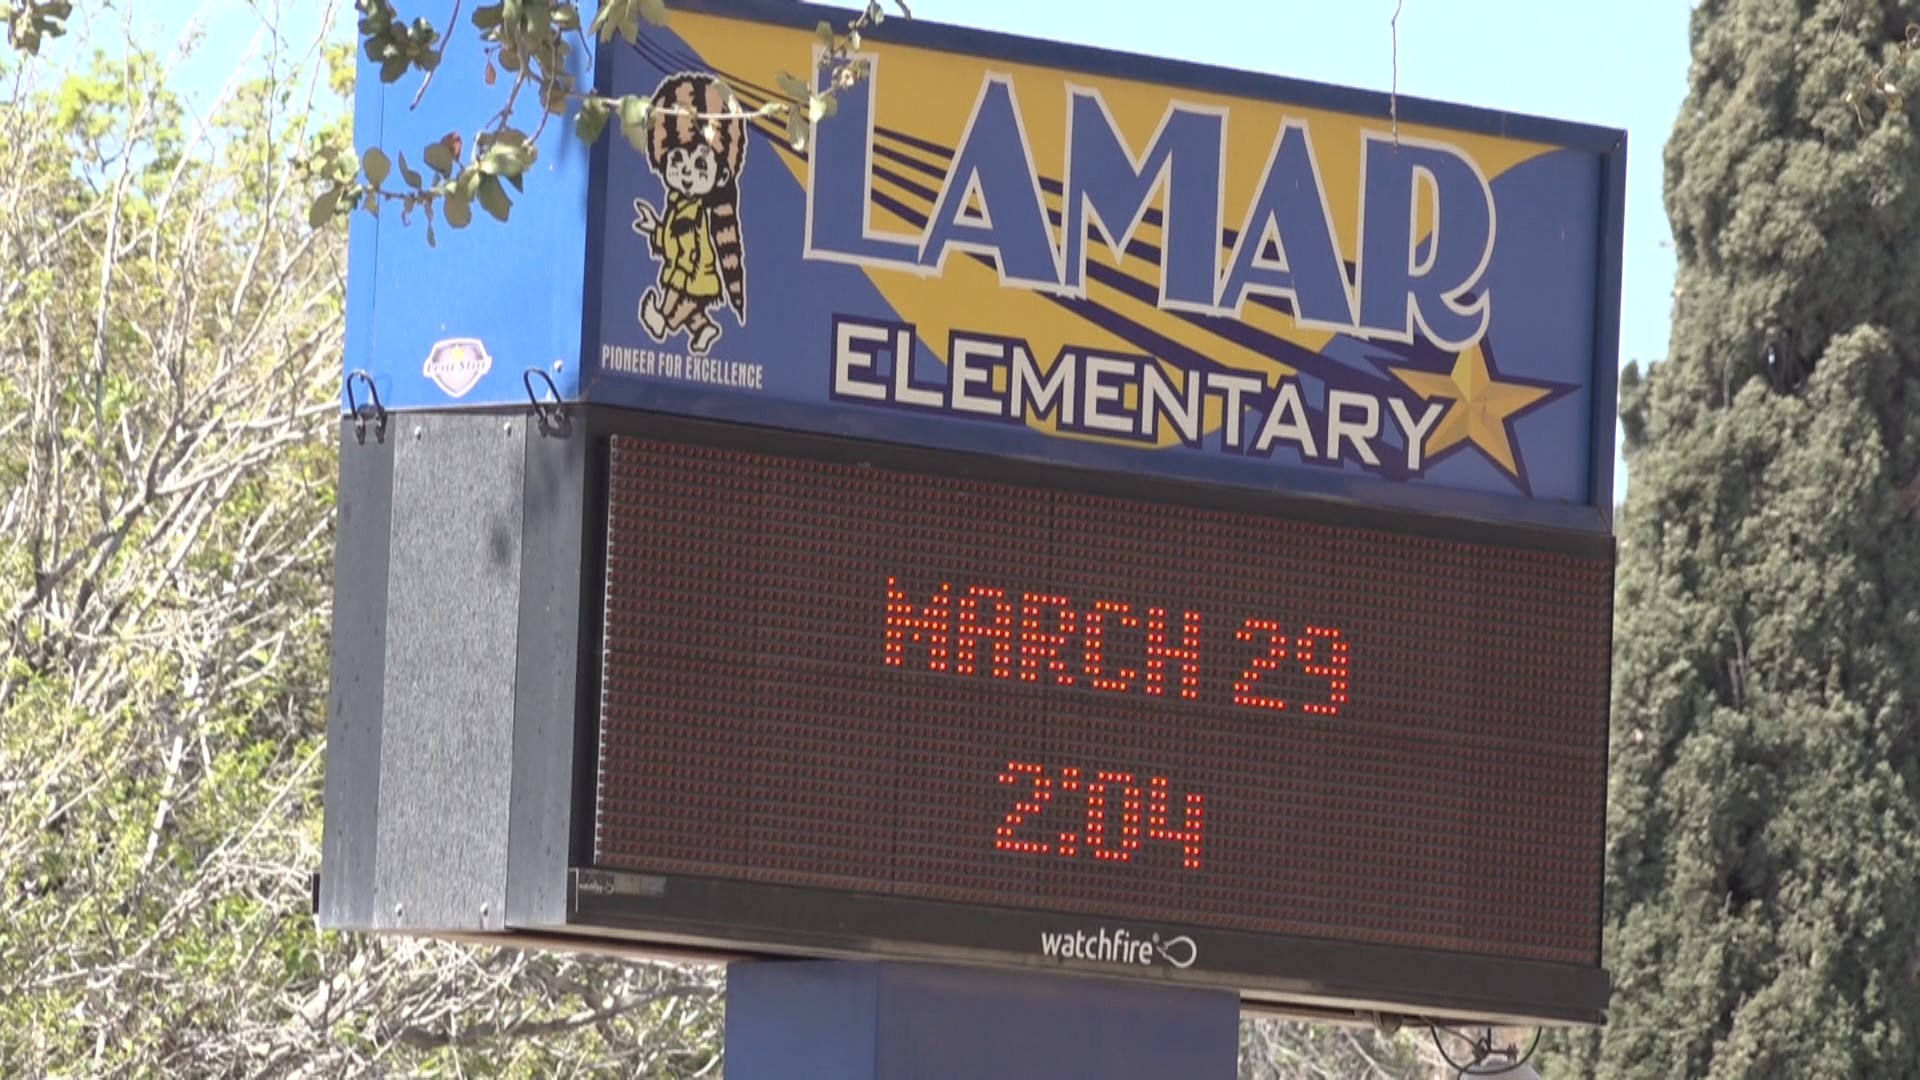 Due to low school performance in the last four years, the MISD Board of Trustees have approved for Lamar Elementary to become an in-district charter school.